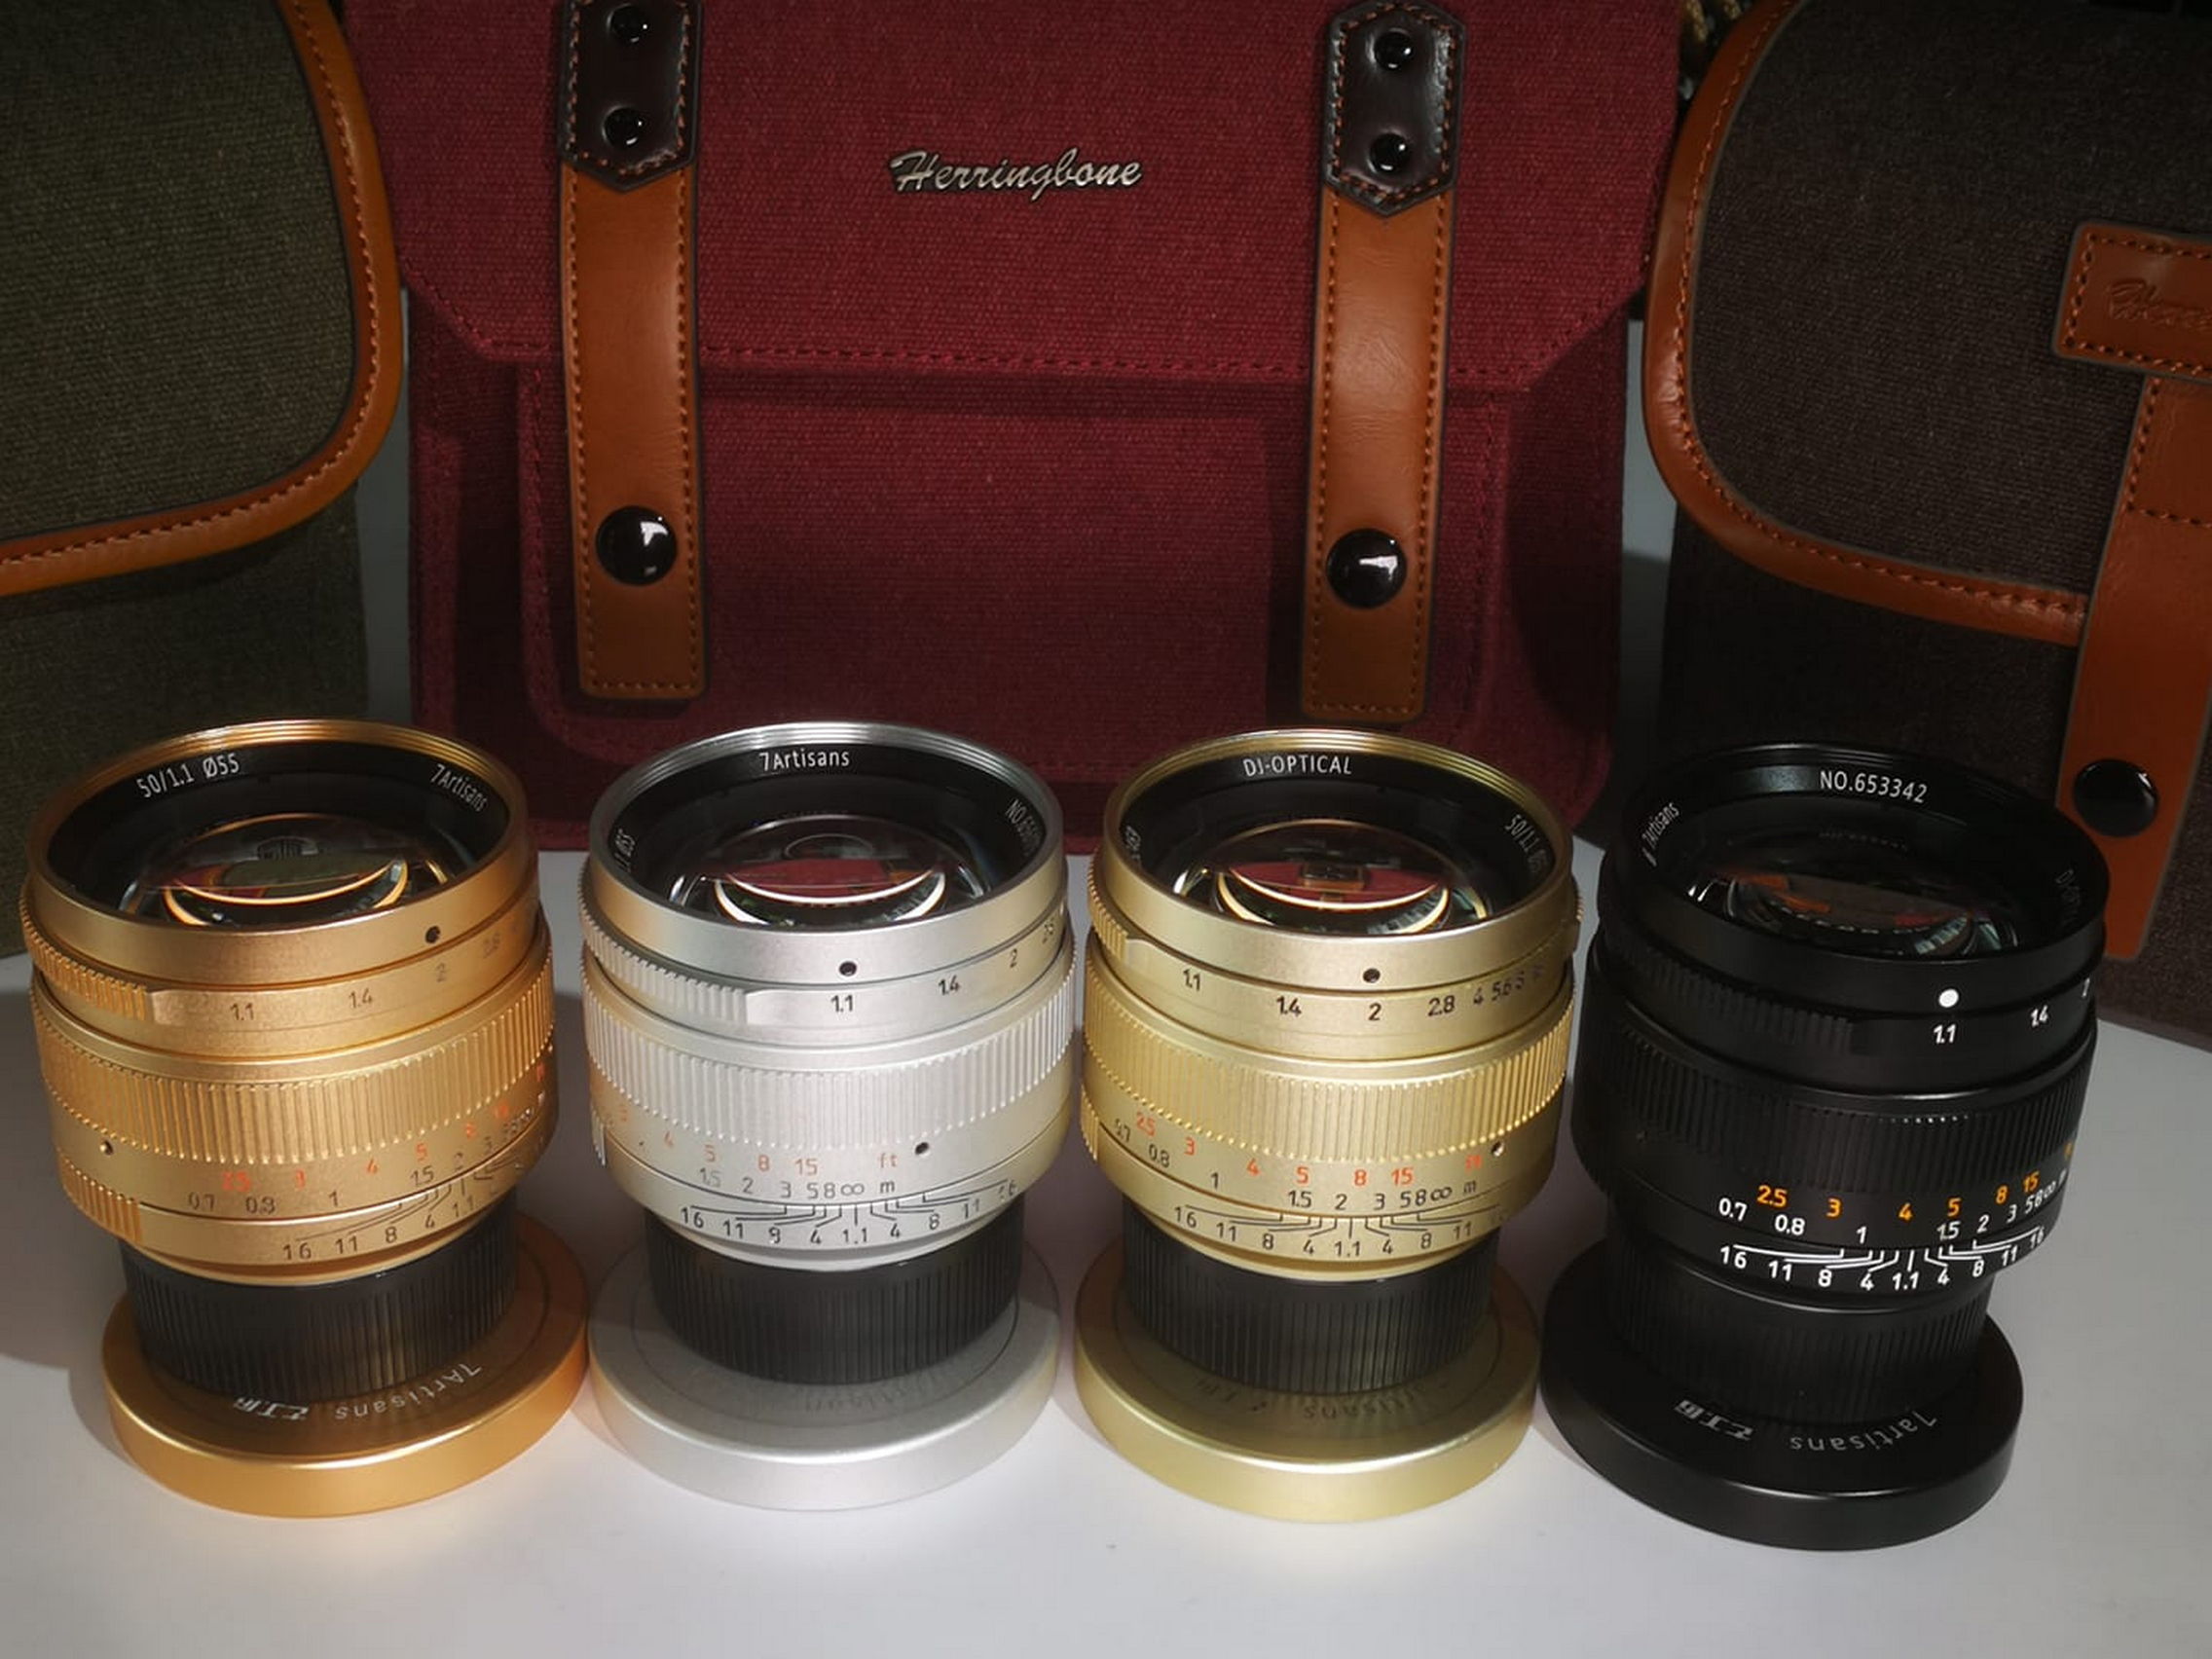 7Artisans 50mm F1.1 Limited Gold Edition